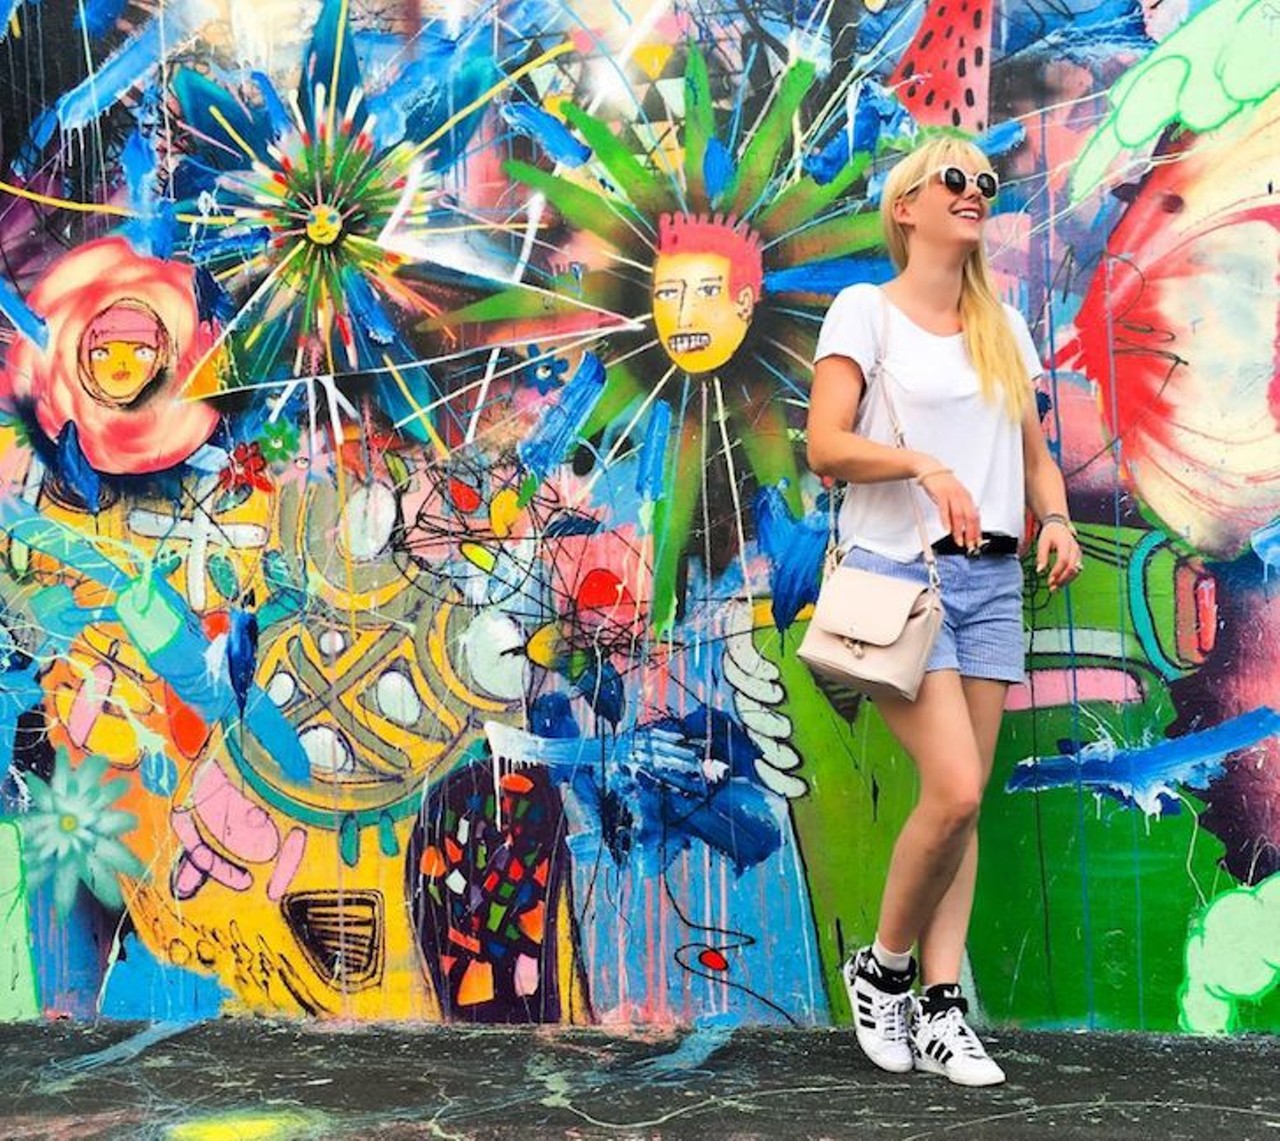 Wynwood Walls
2520 NW Second Ave., Miami, (305) 531-4411
These uniquely artistic walls feature colorful paintings that are always in rotation, so every time you visit, you&#146;ll find another masterpiece to enjoy. 
Photo via smilejdh/Instagram